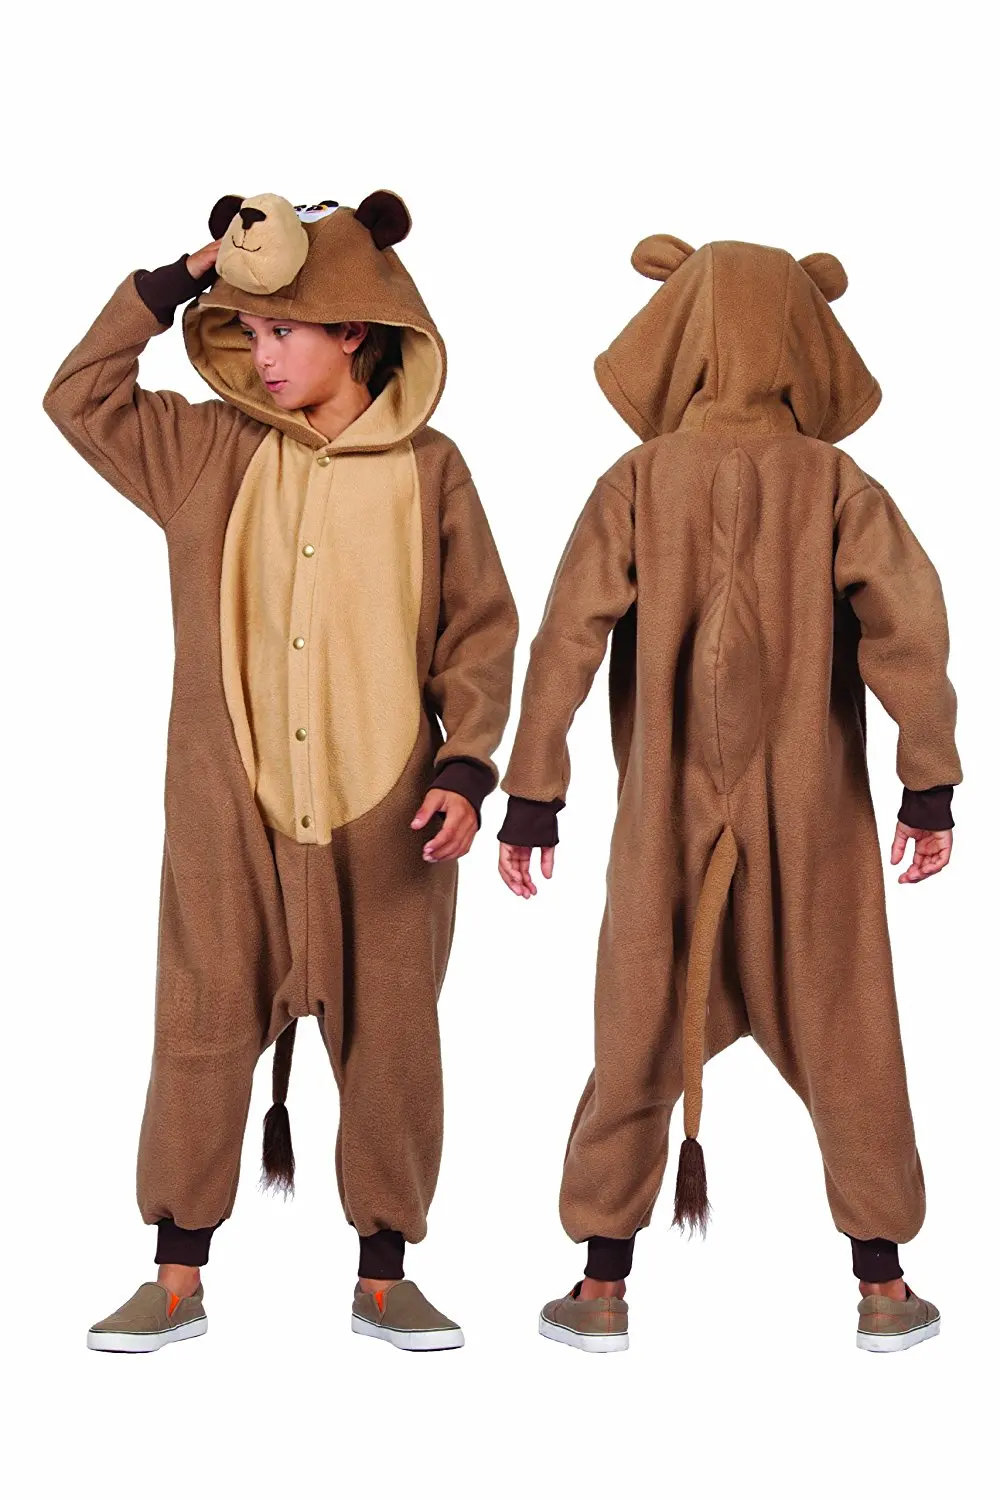 Cheap Making A Camel Costume  find Making A Camel Costume  